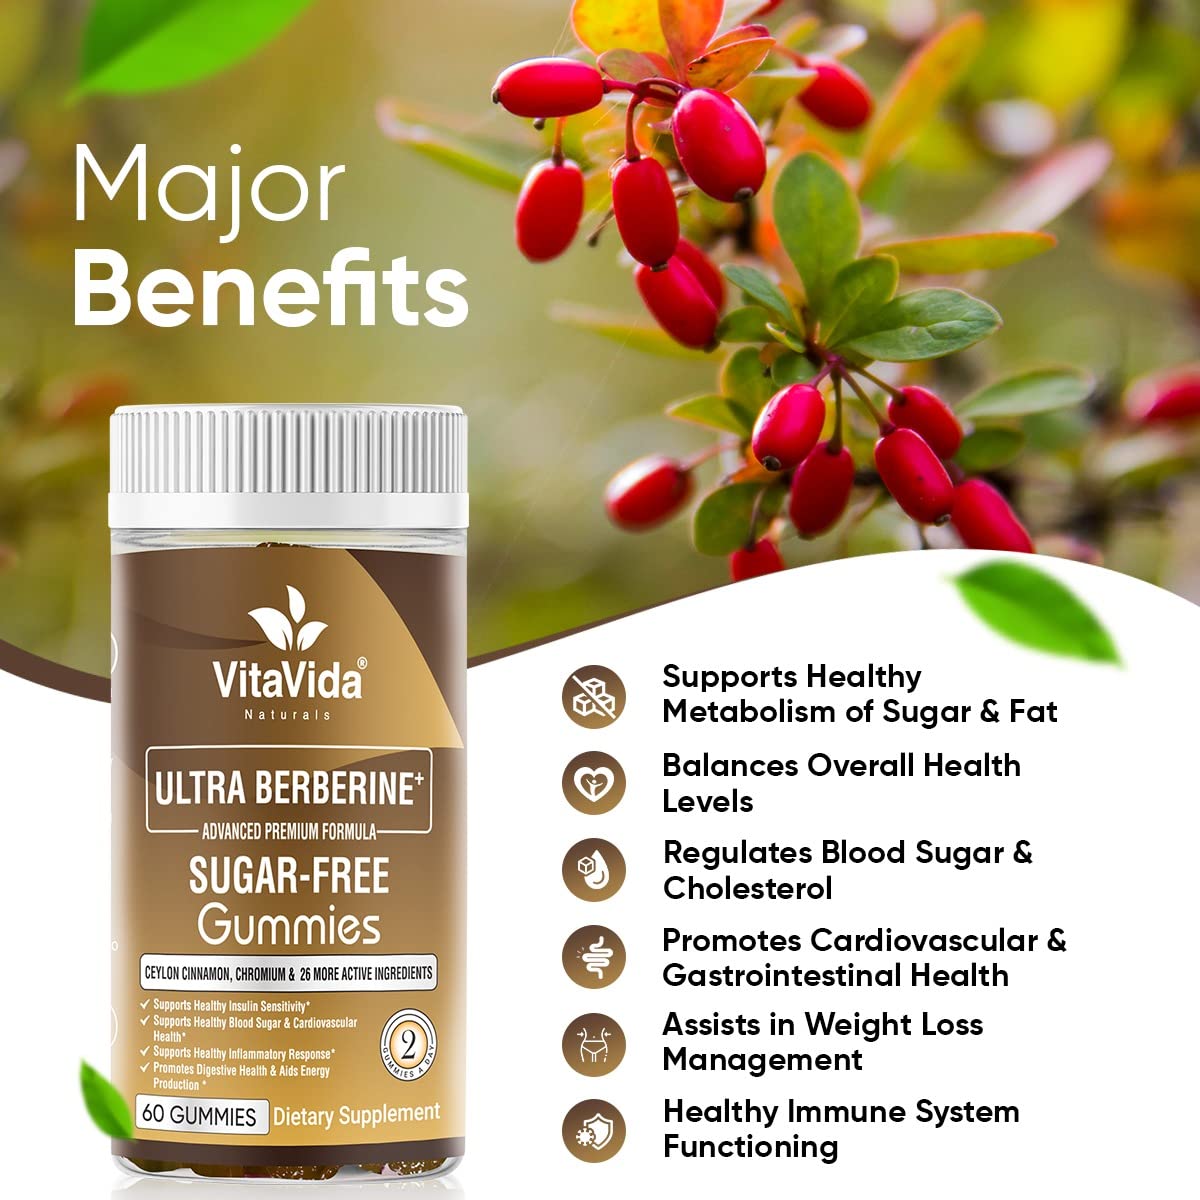 VVNATURALS Sugar-Free 2250mg Extra Strength Berberine with Ceylon Cinnamon HCI 82.1 Concentrated 97% Highly Purified &10x Bioavailable W/Bitter Melon & More |Glucose Metabolism, Weight Management|60Ct